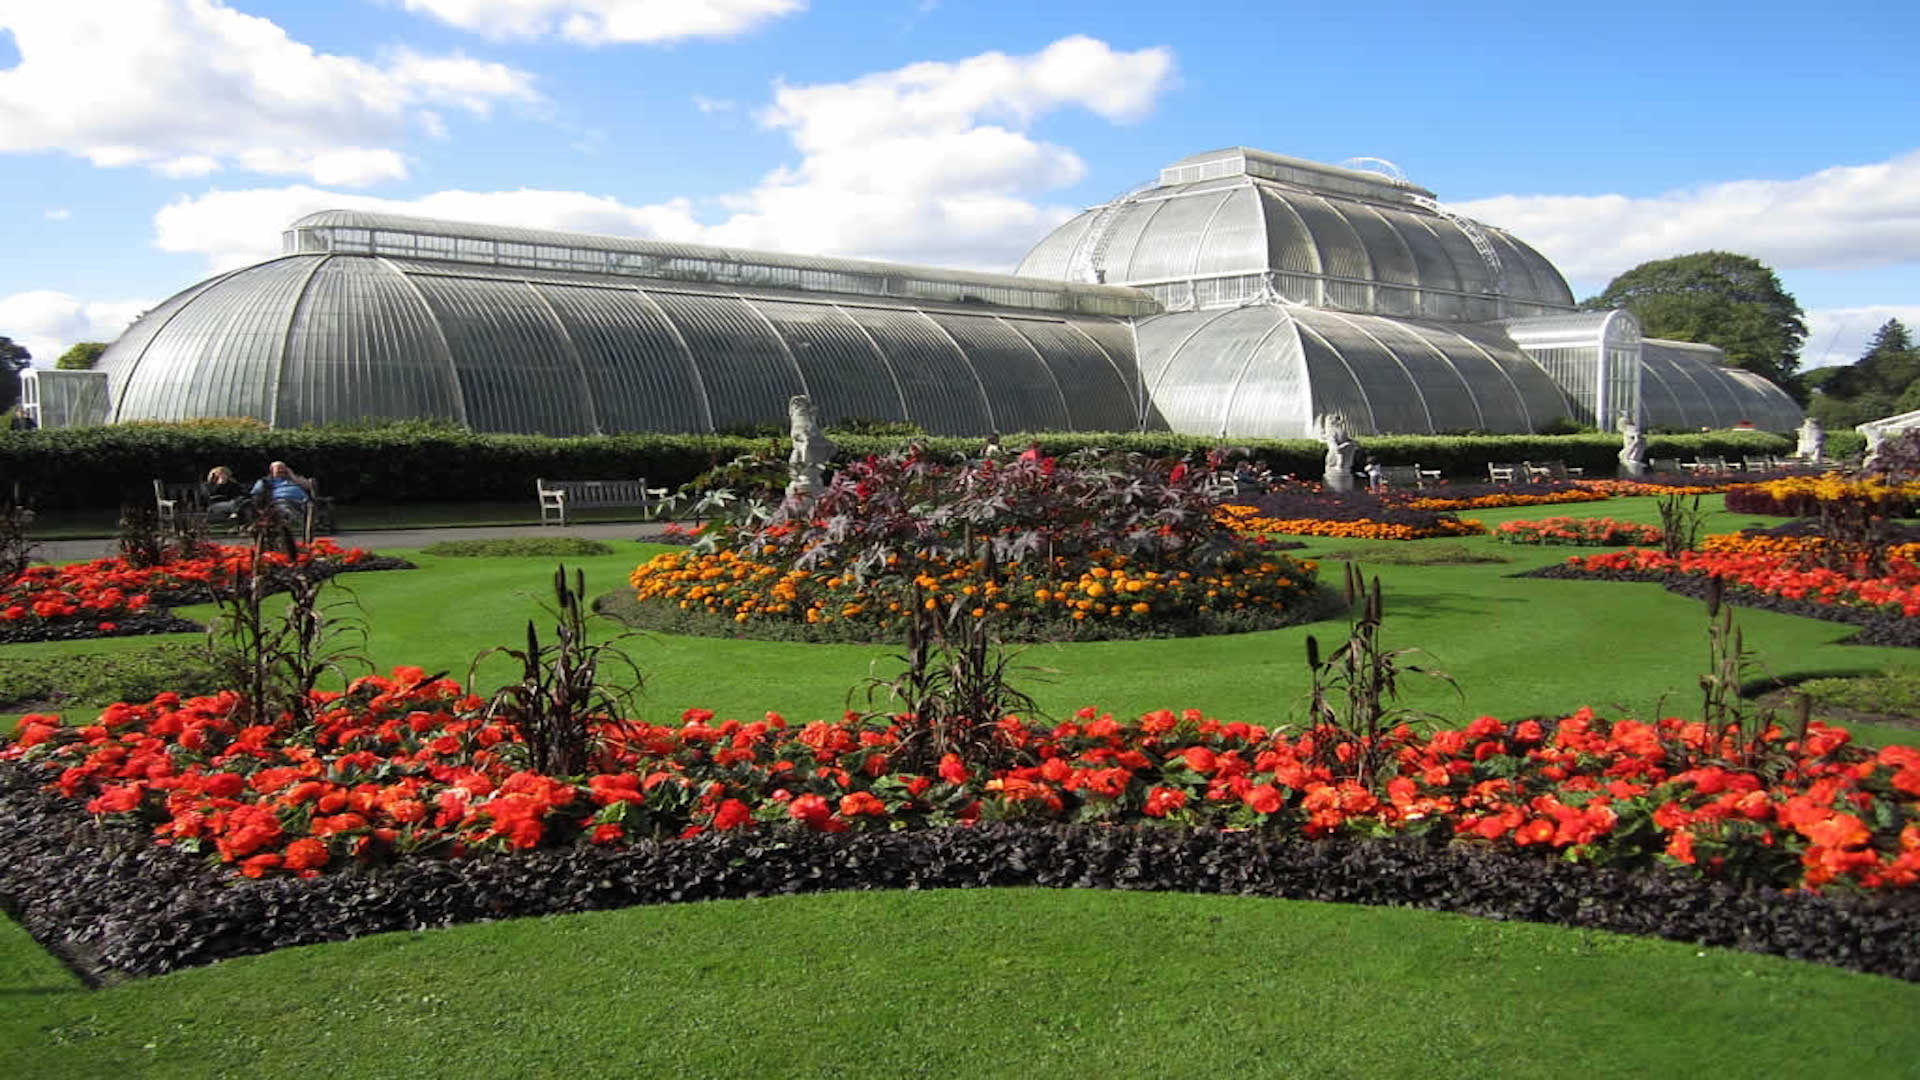 Tickets to Kew Gardens normally cost upwards of £15, but not for people receiving benefits under the new scheme